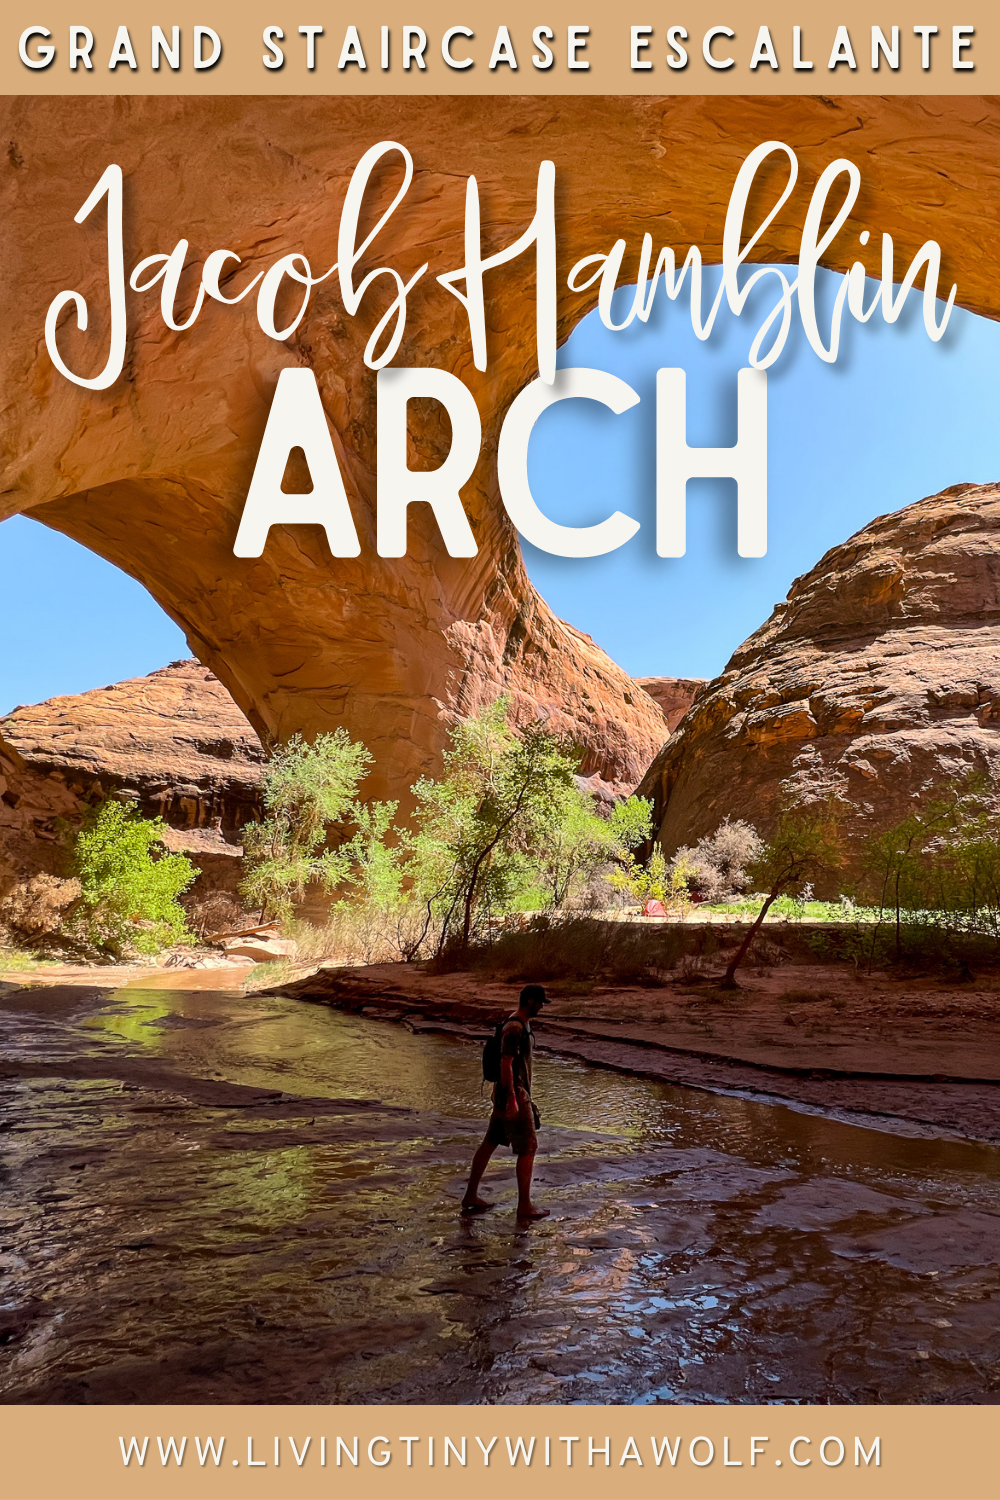 Shortest Hike to Jacob Hamblin Arch via “Sneaker Route” in Coyote Gulch